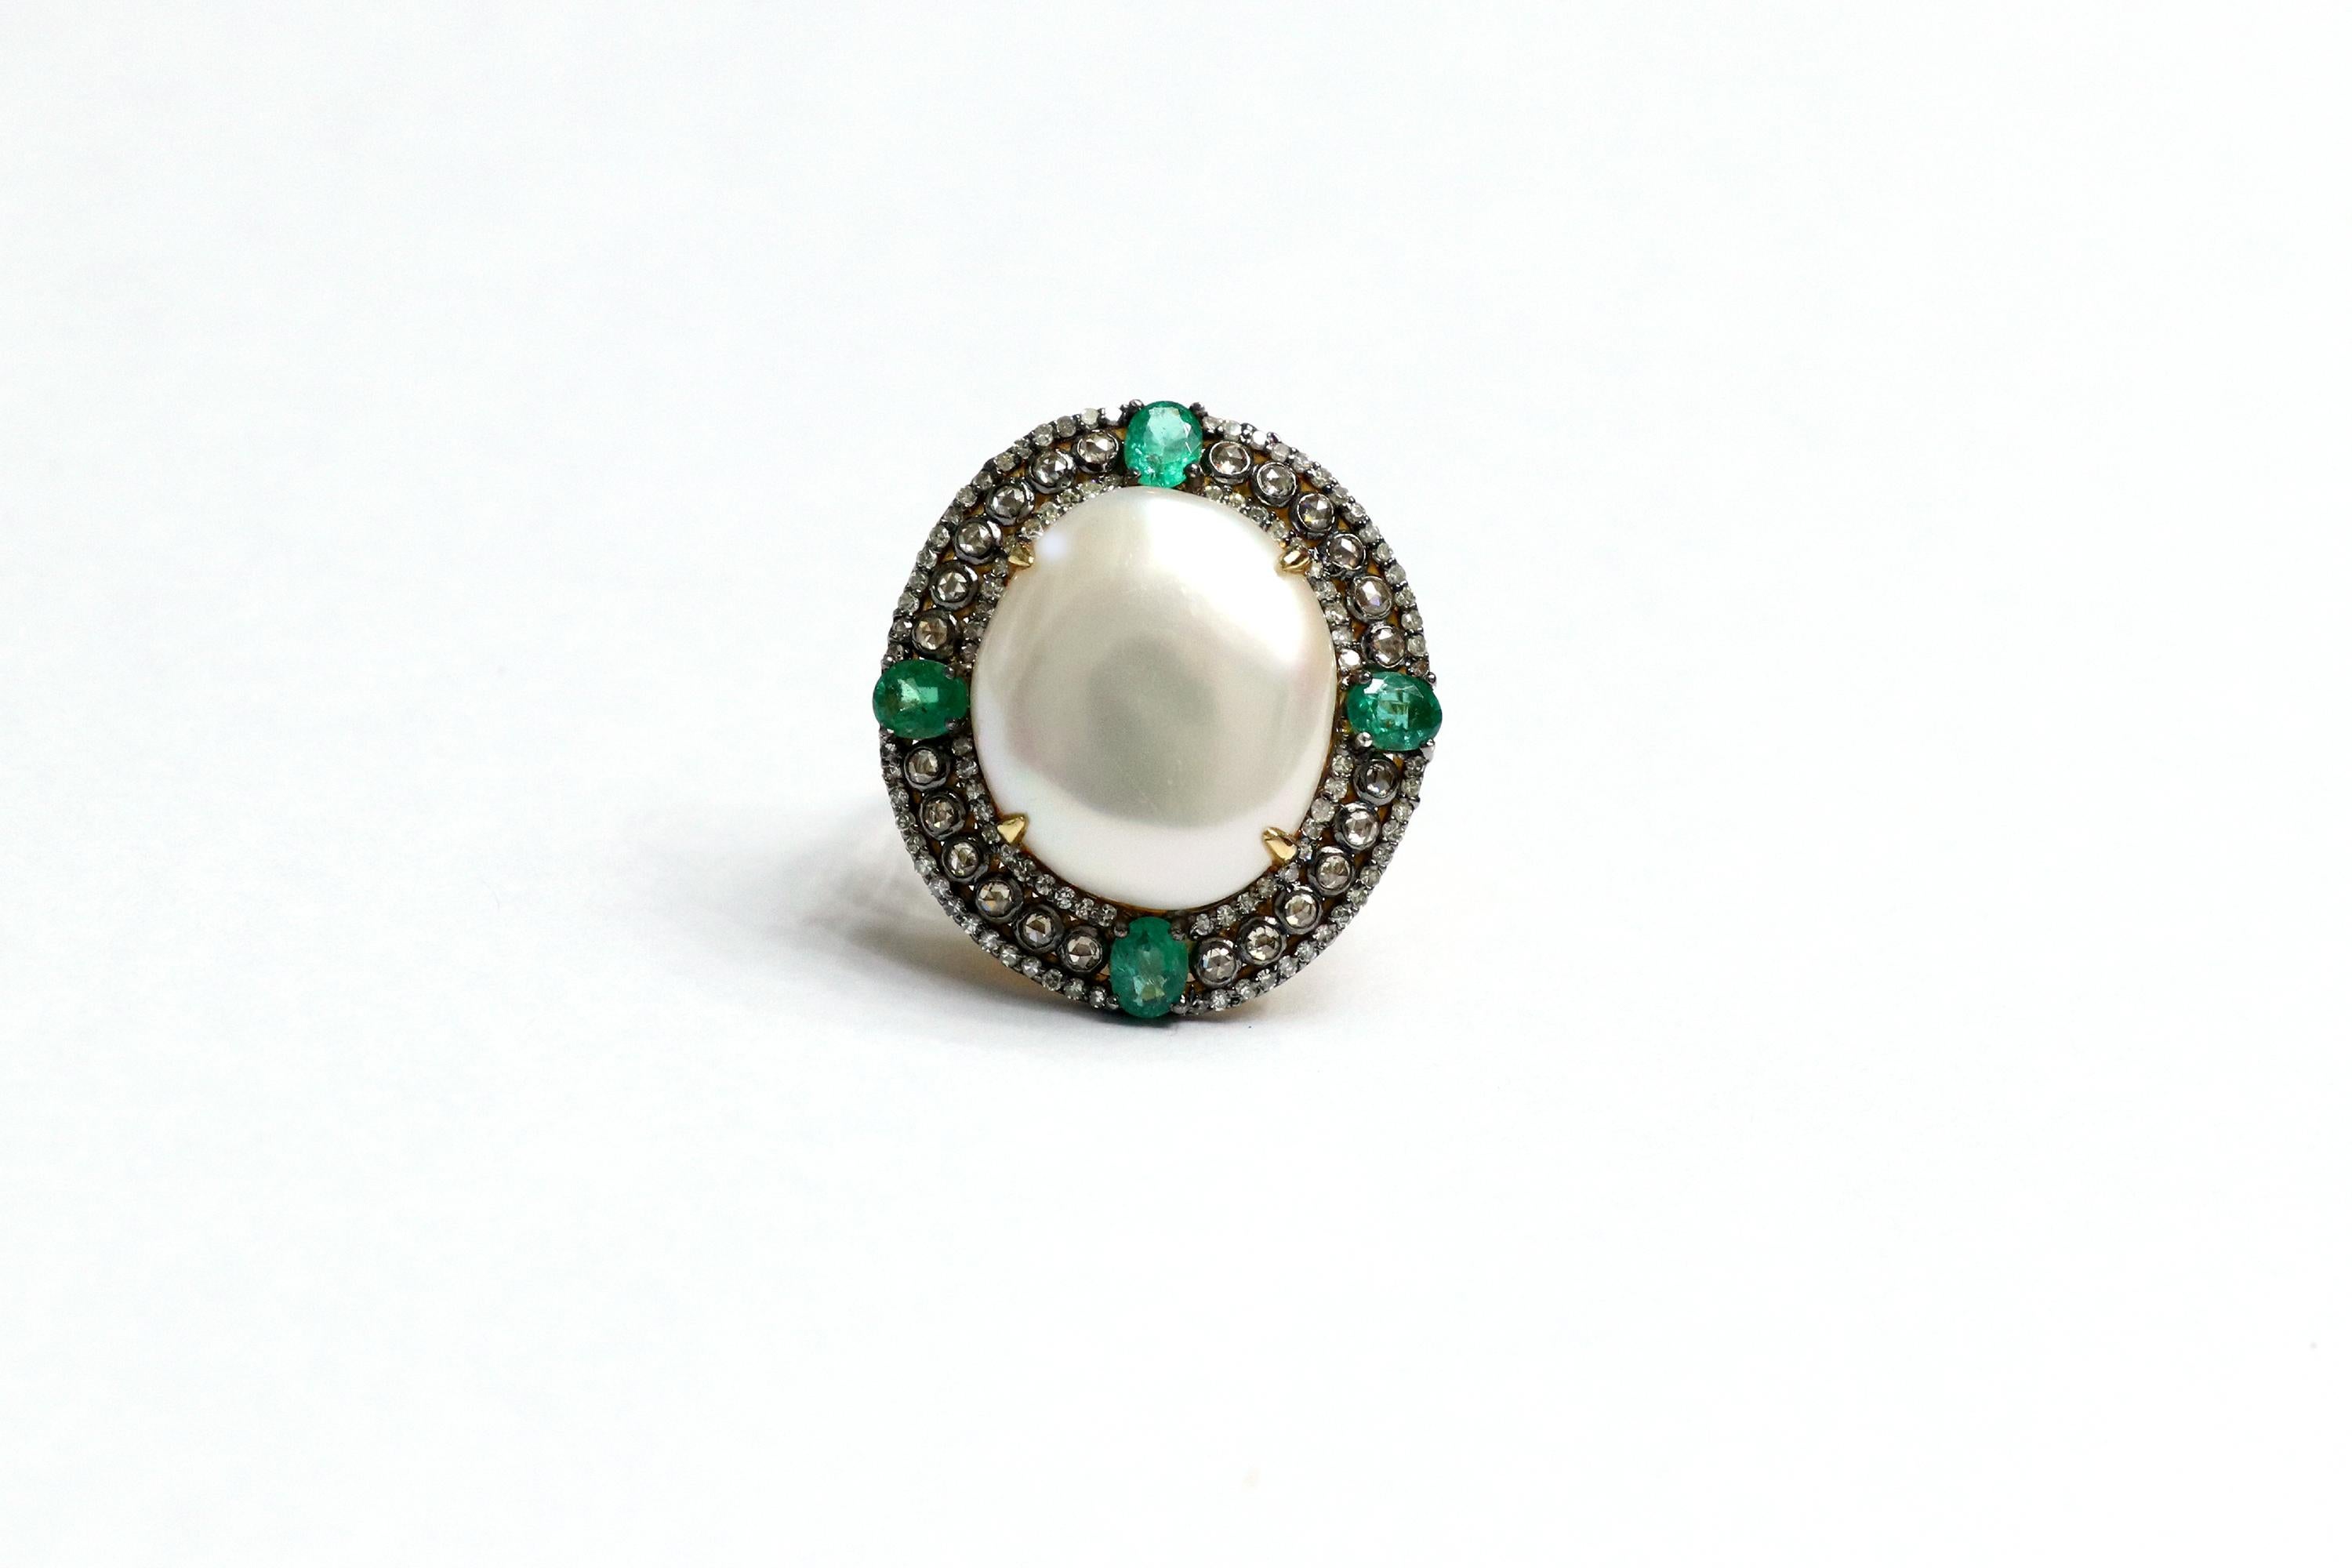 Oval Cut Victorian Style Emerald, Diamond, and Pearl Statement Ring